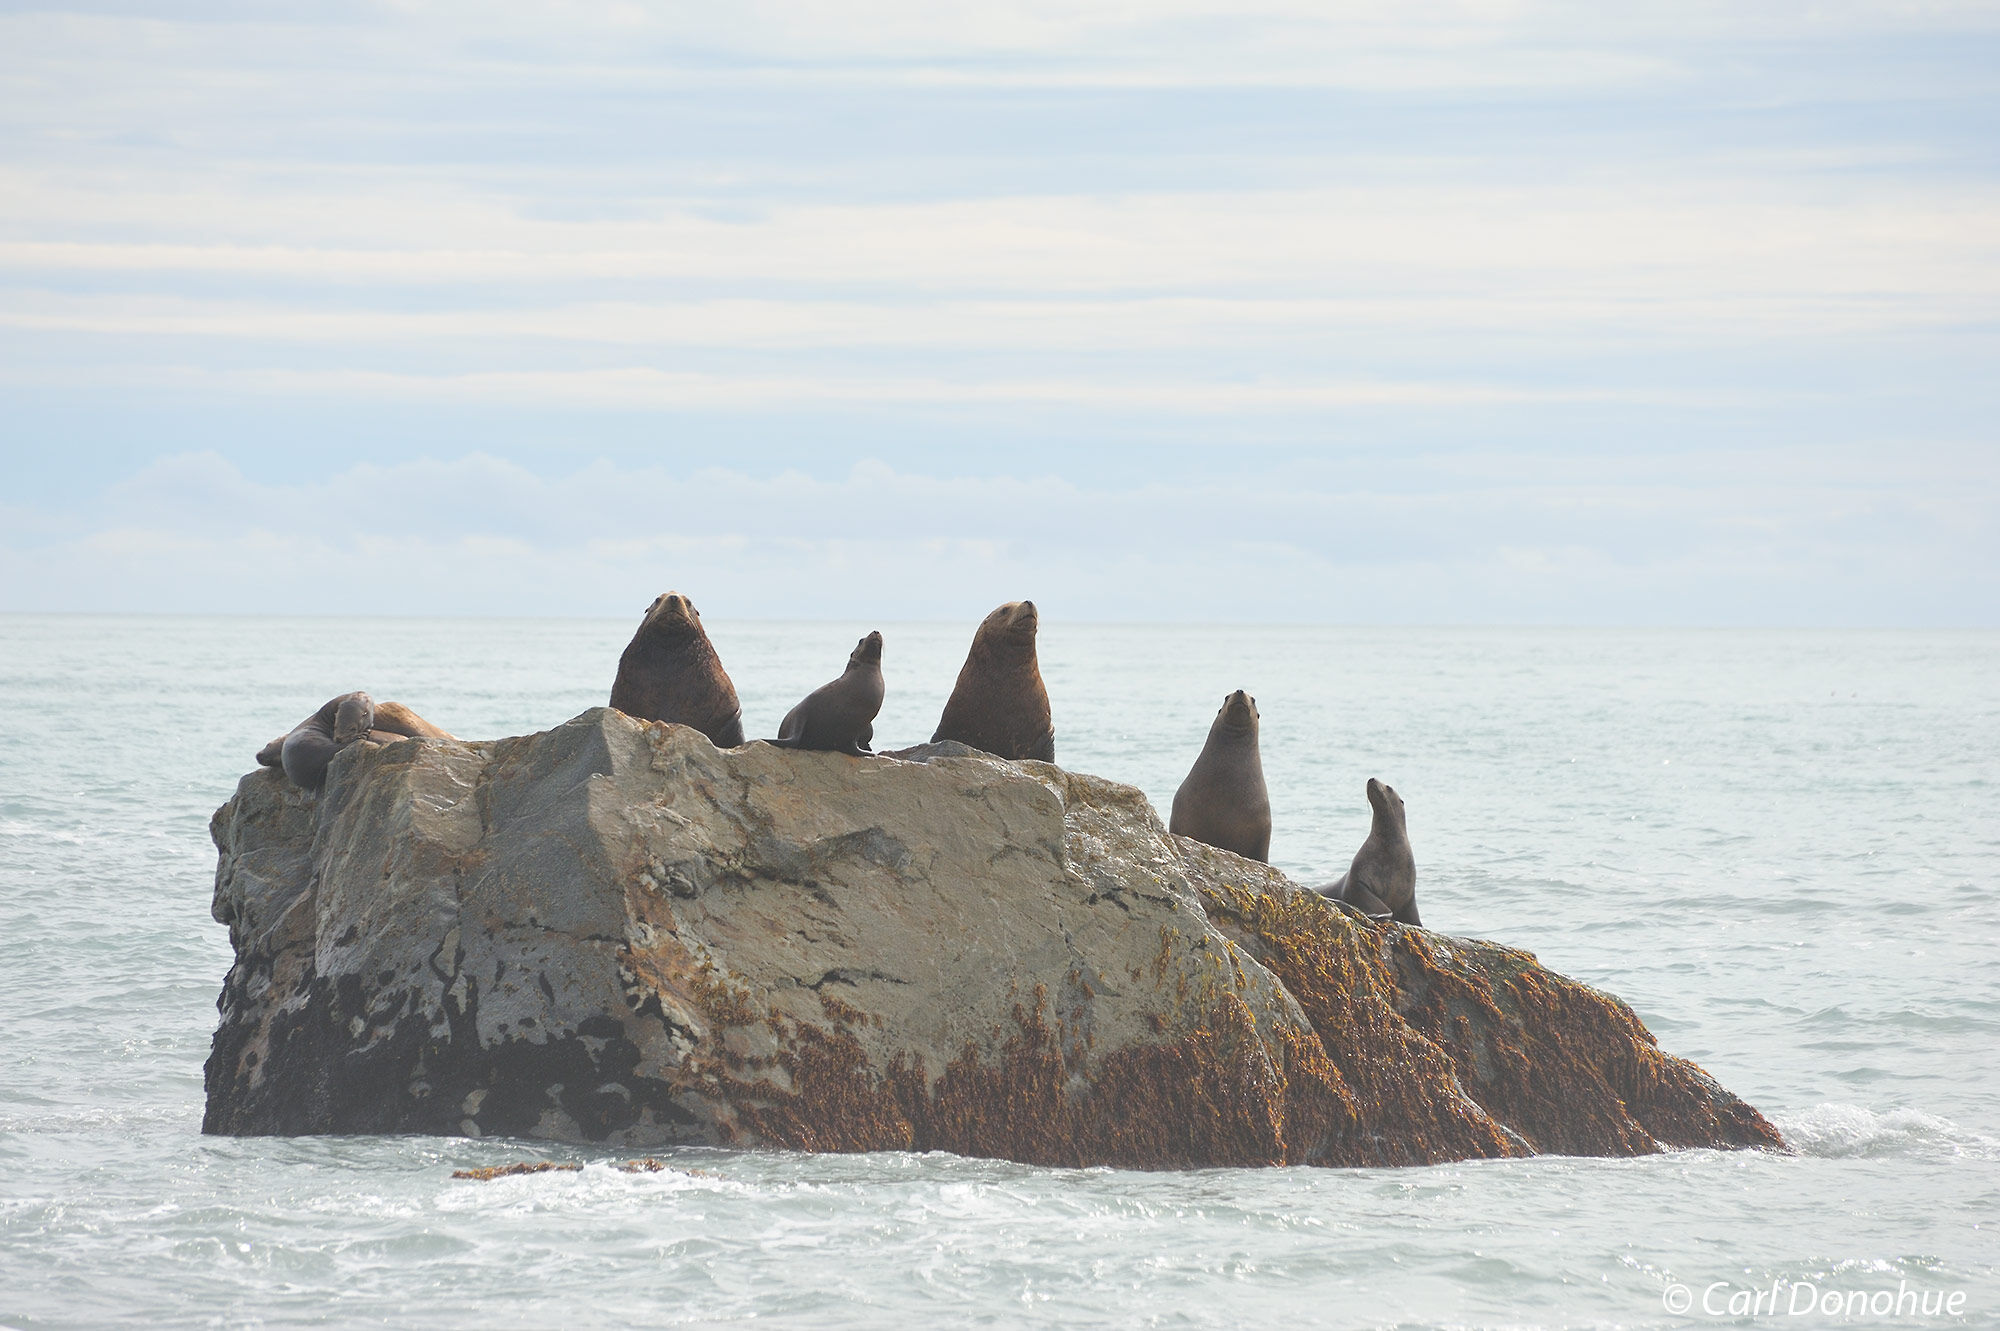 Steller sea lions hauled on a rock offshore from Malaspina Glacier, Wrangell - St. Elias  National Park and Preserve, Alaska.